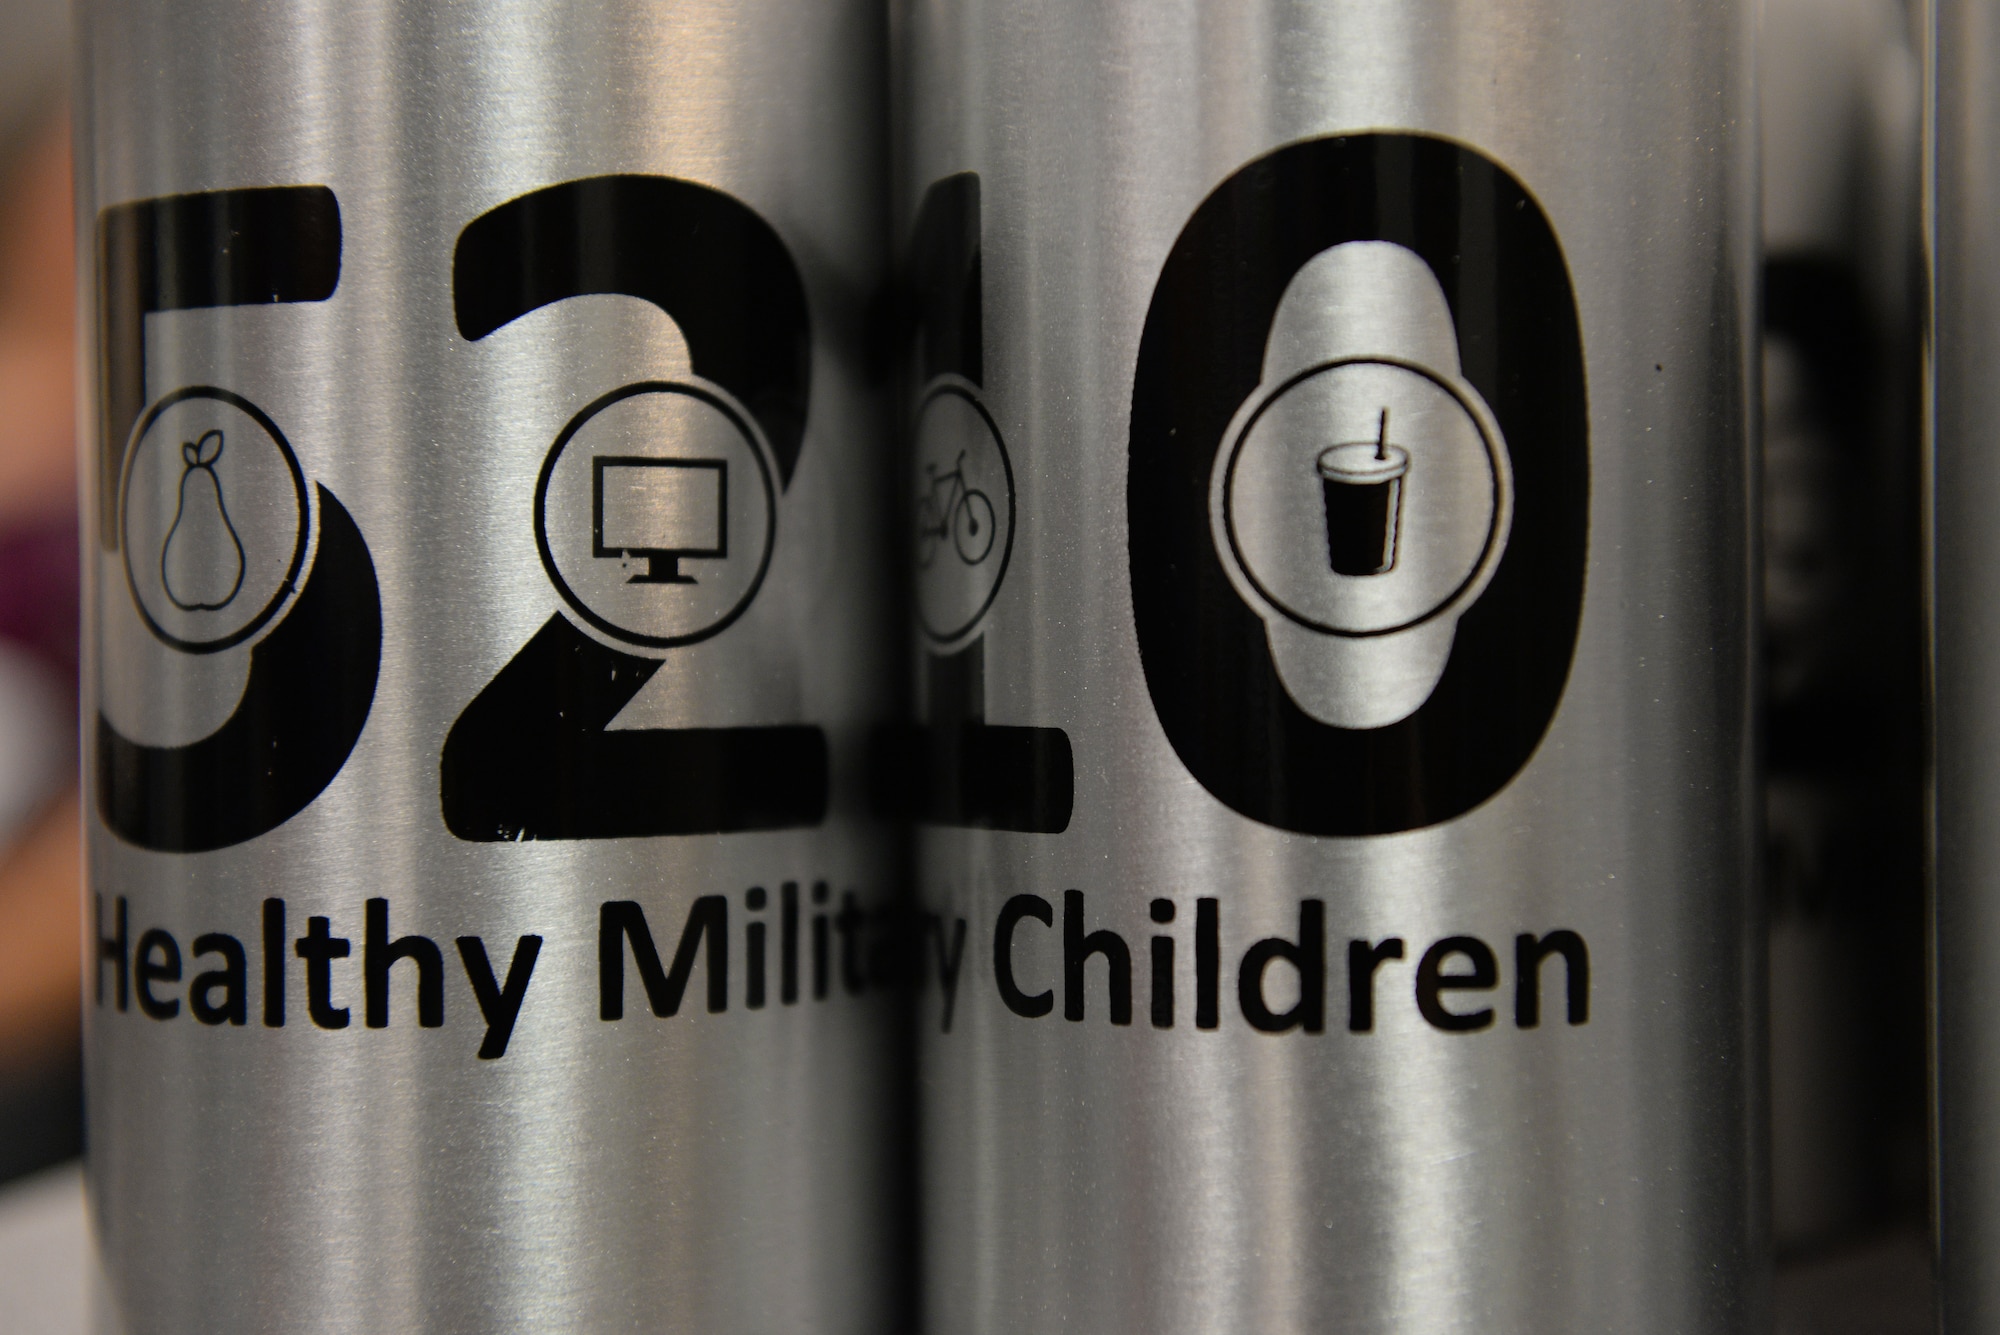 Water bottles with the 5210 Healthy Military Children program logo sit during a cooking class called ‘EMFP Garden to Table Cooking Class’, August 6, 2015 at Scott Air Force Base, Illinois. The HMC program’s goal is to reduce screen time, add one hour of activity, and eat five servings of fruits and vegetables each day. (U.S. Air Force photo by Airman 1st Class Erica Holbert-Siebert)